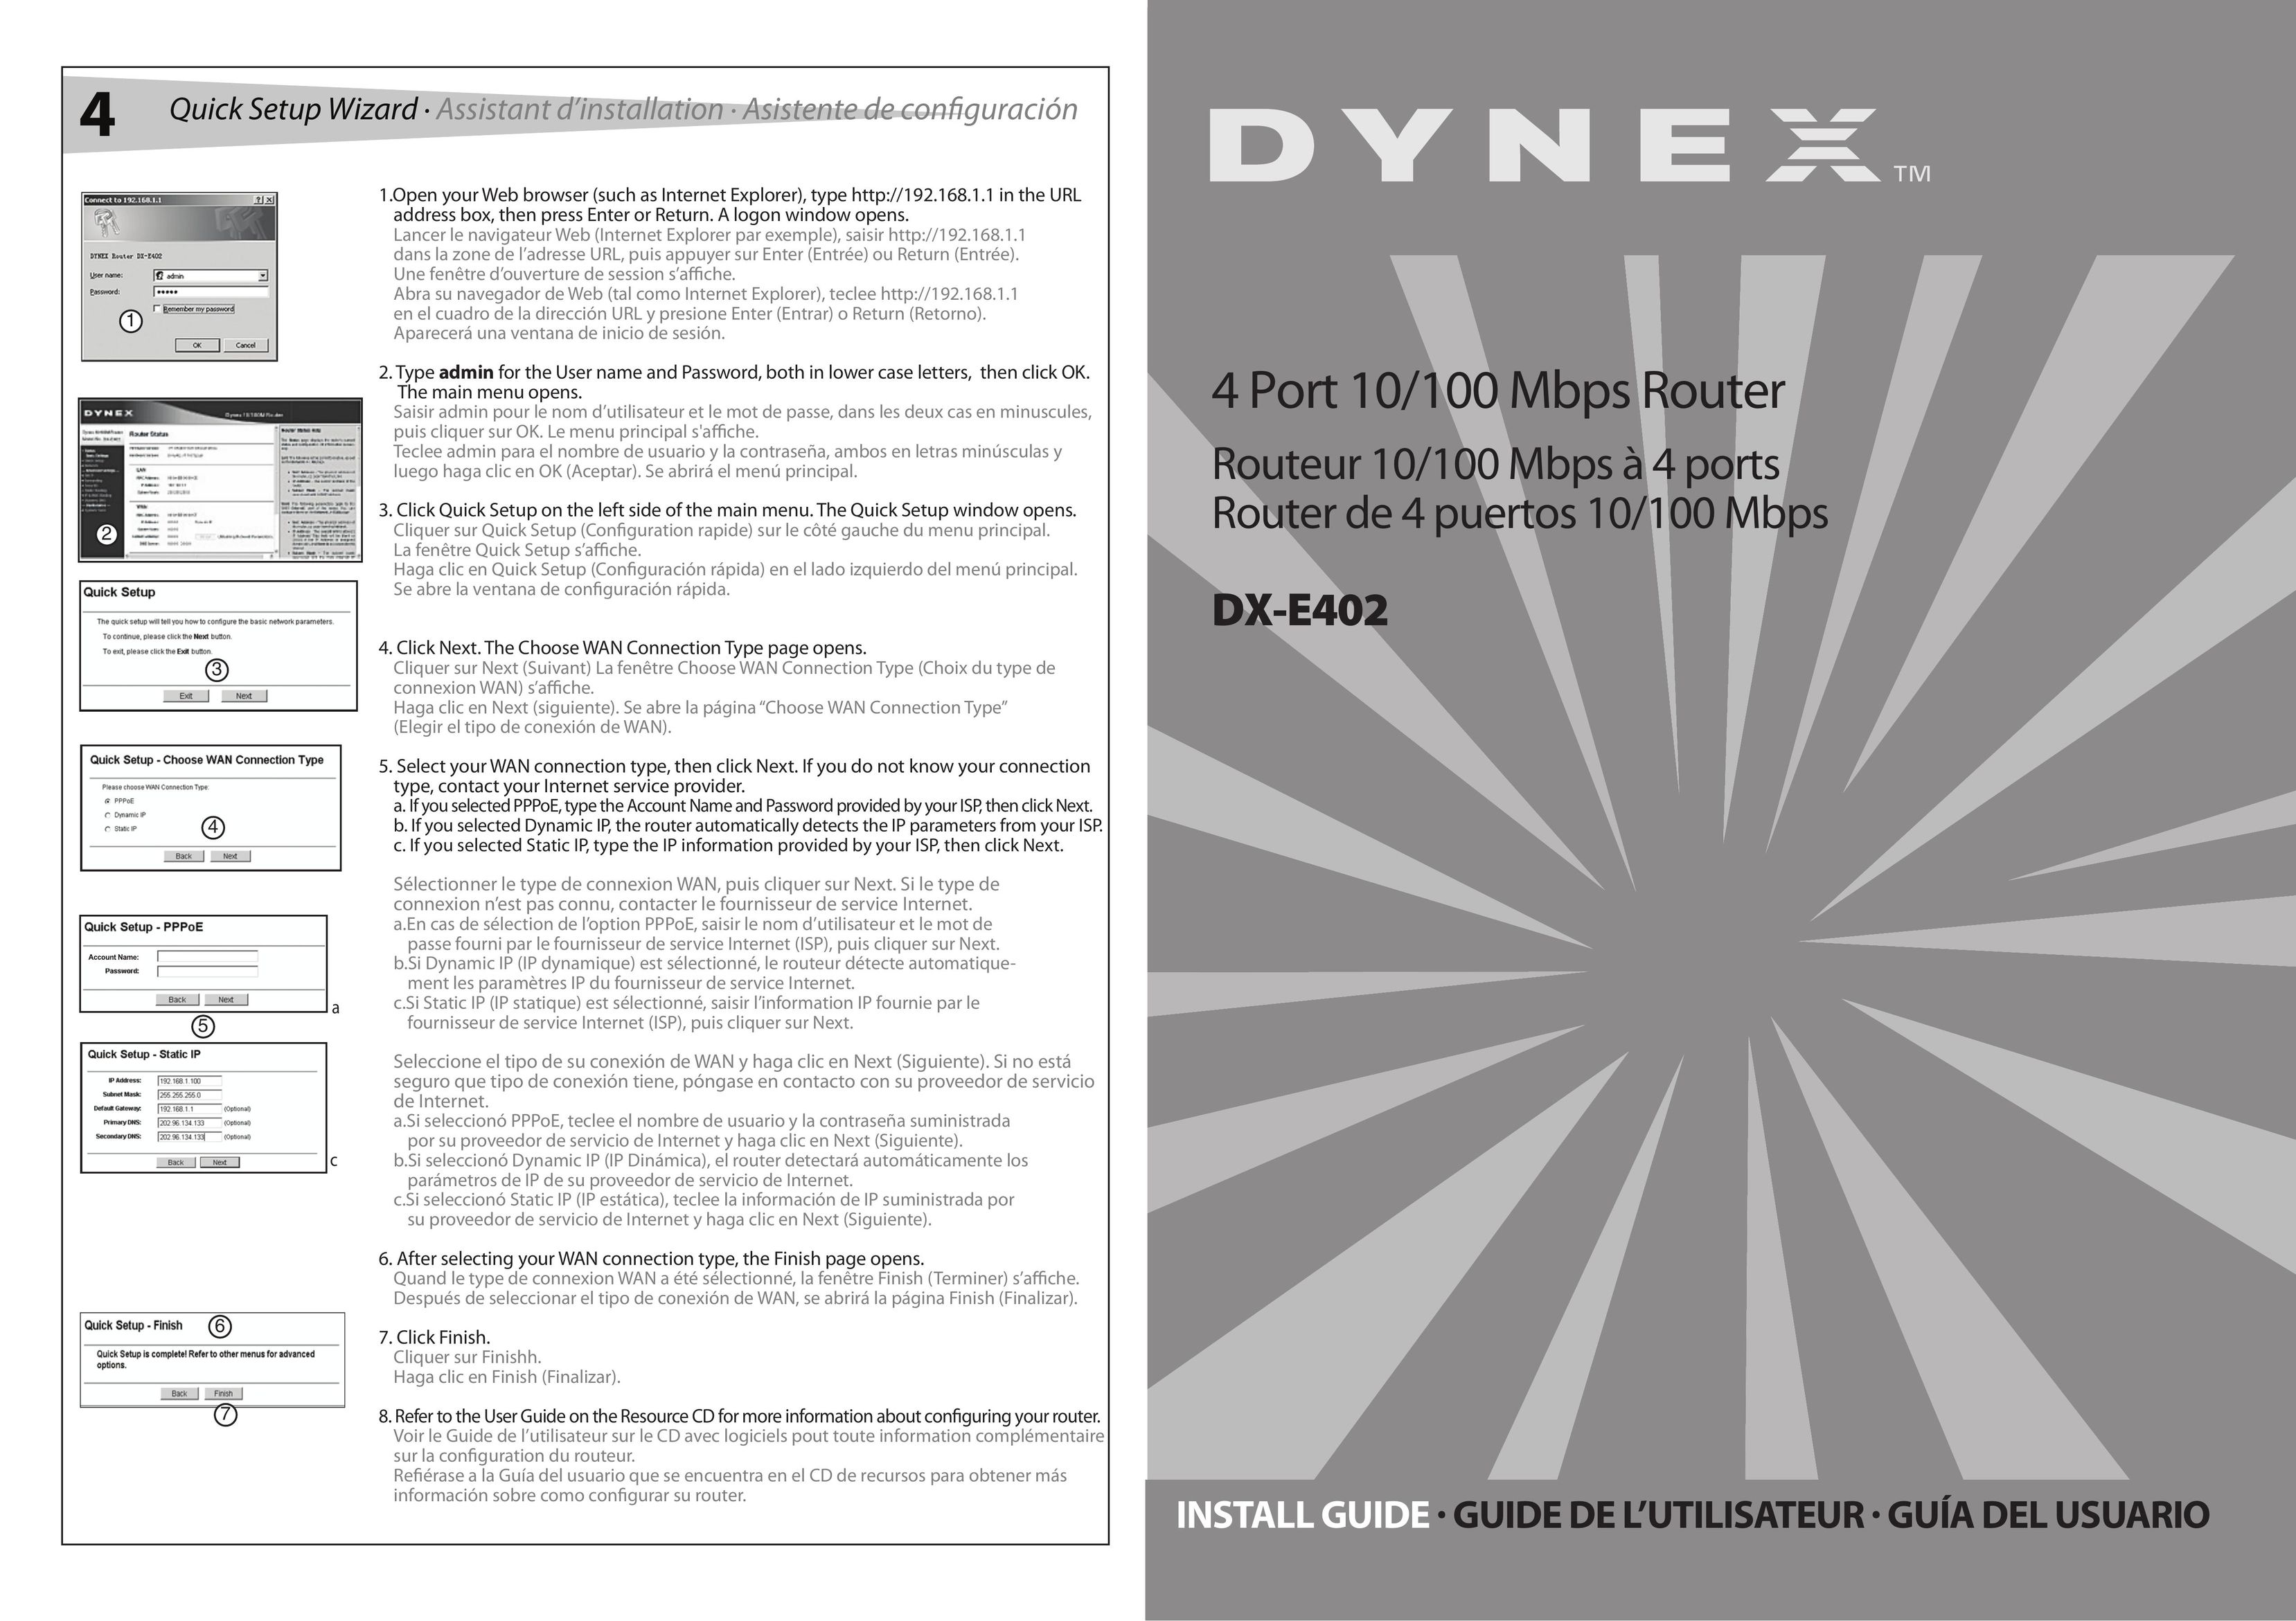 Dynex DX-E402 Network Router User Manual